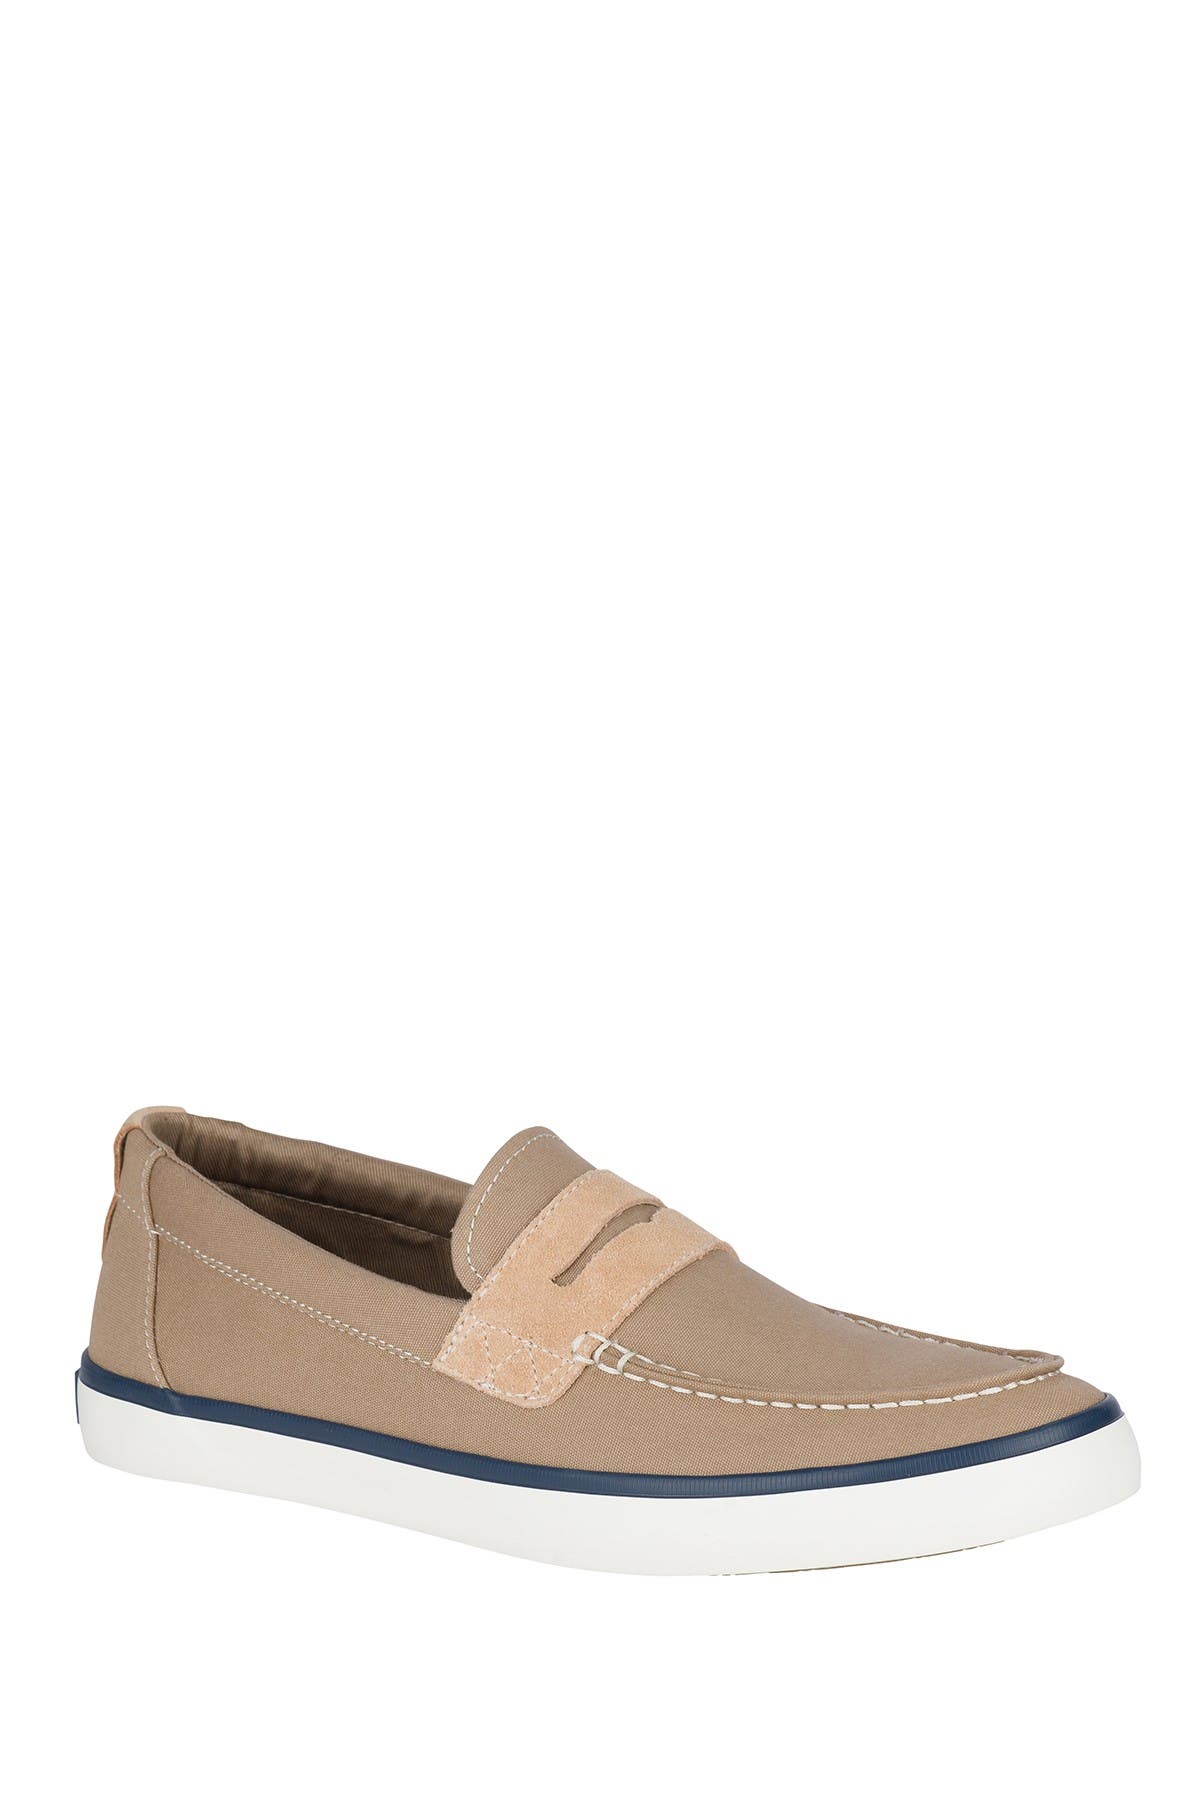 Sperry | Mainsail Penny Loafer 